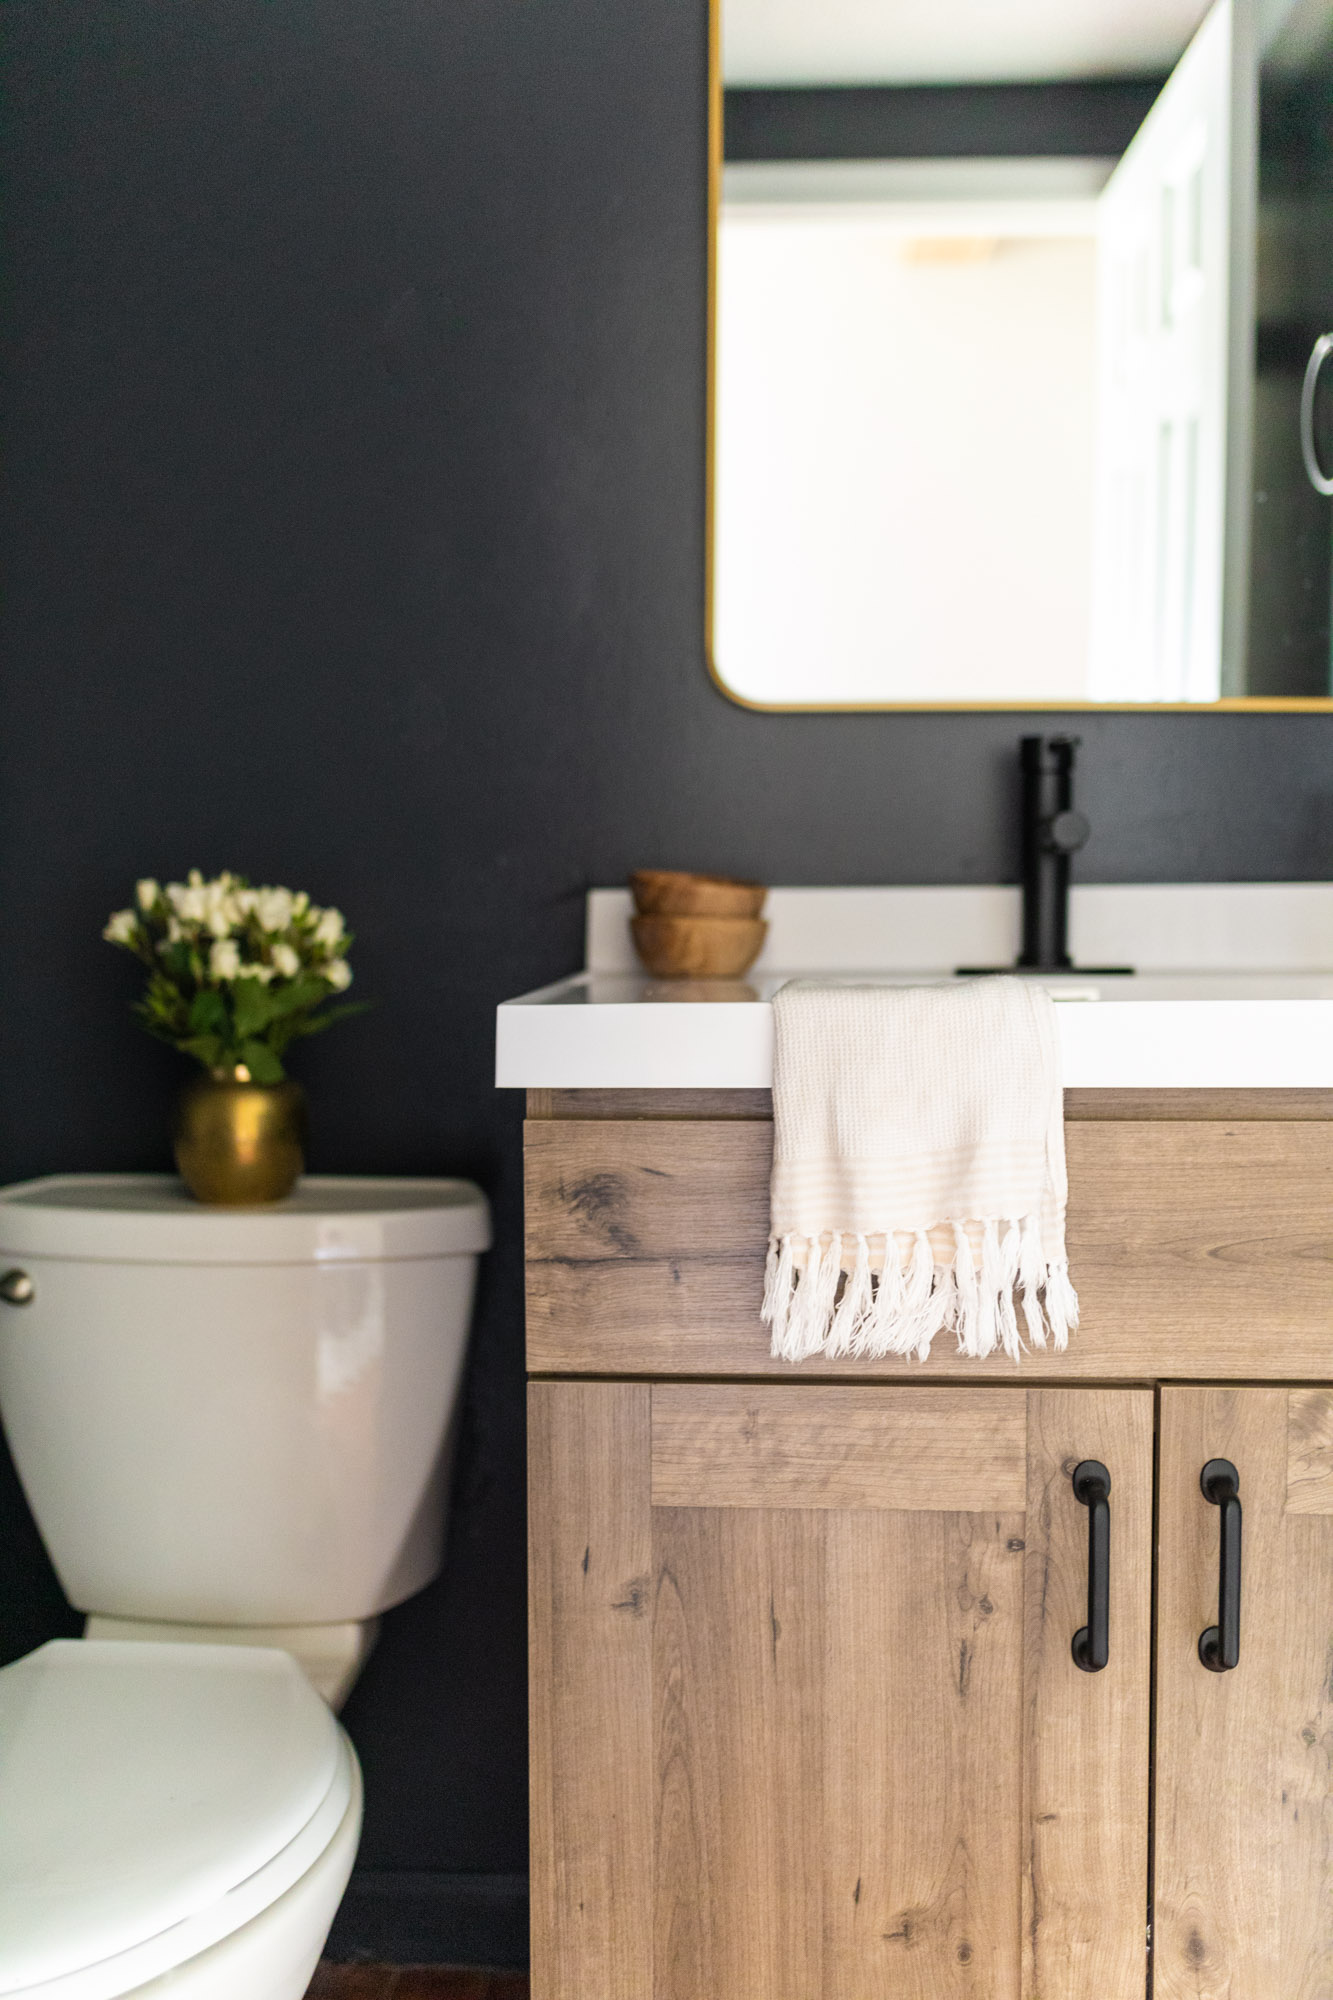 Our DIY Small Bathroom Makeover on a Budget